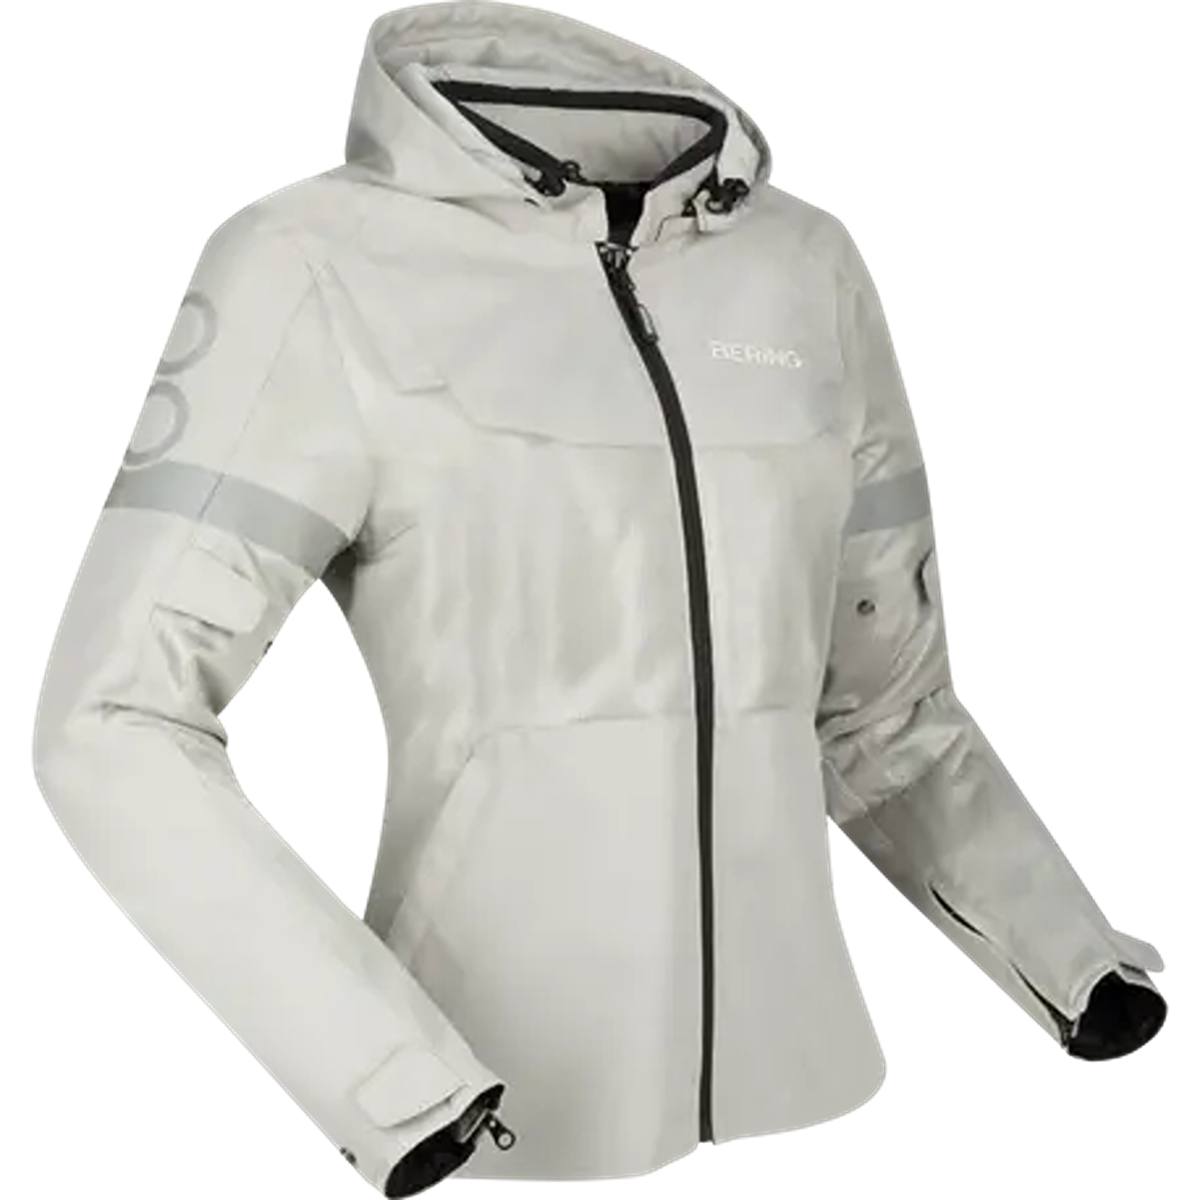 Image of Bering Lady Profil Jacket Grey Black Taille T2